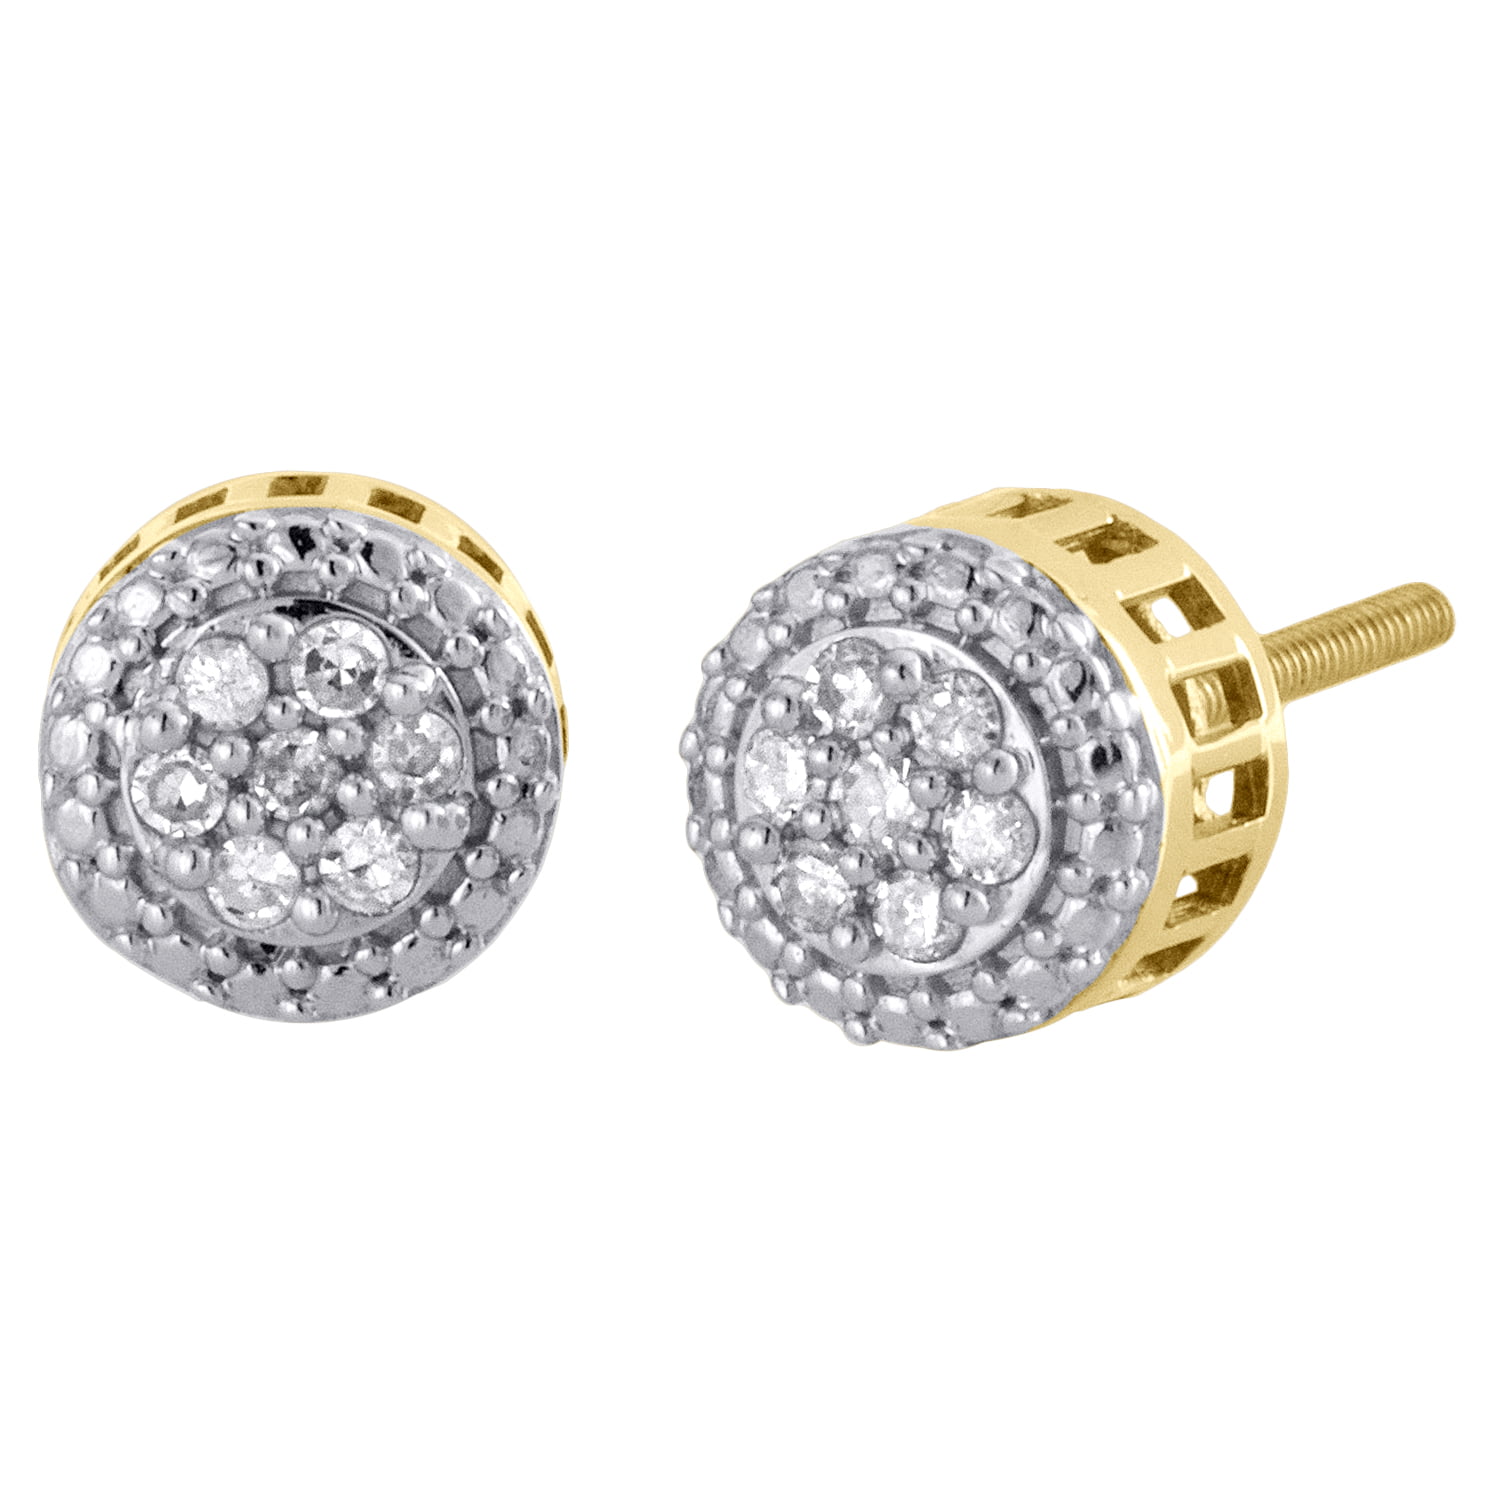 Details about  / 0.06 Ct Natural Round Cut White Diamond Stud Earring 10k Solid Yellow Gold 6 mm